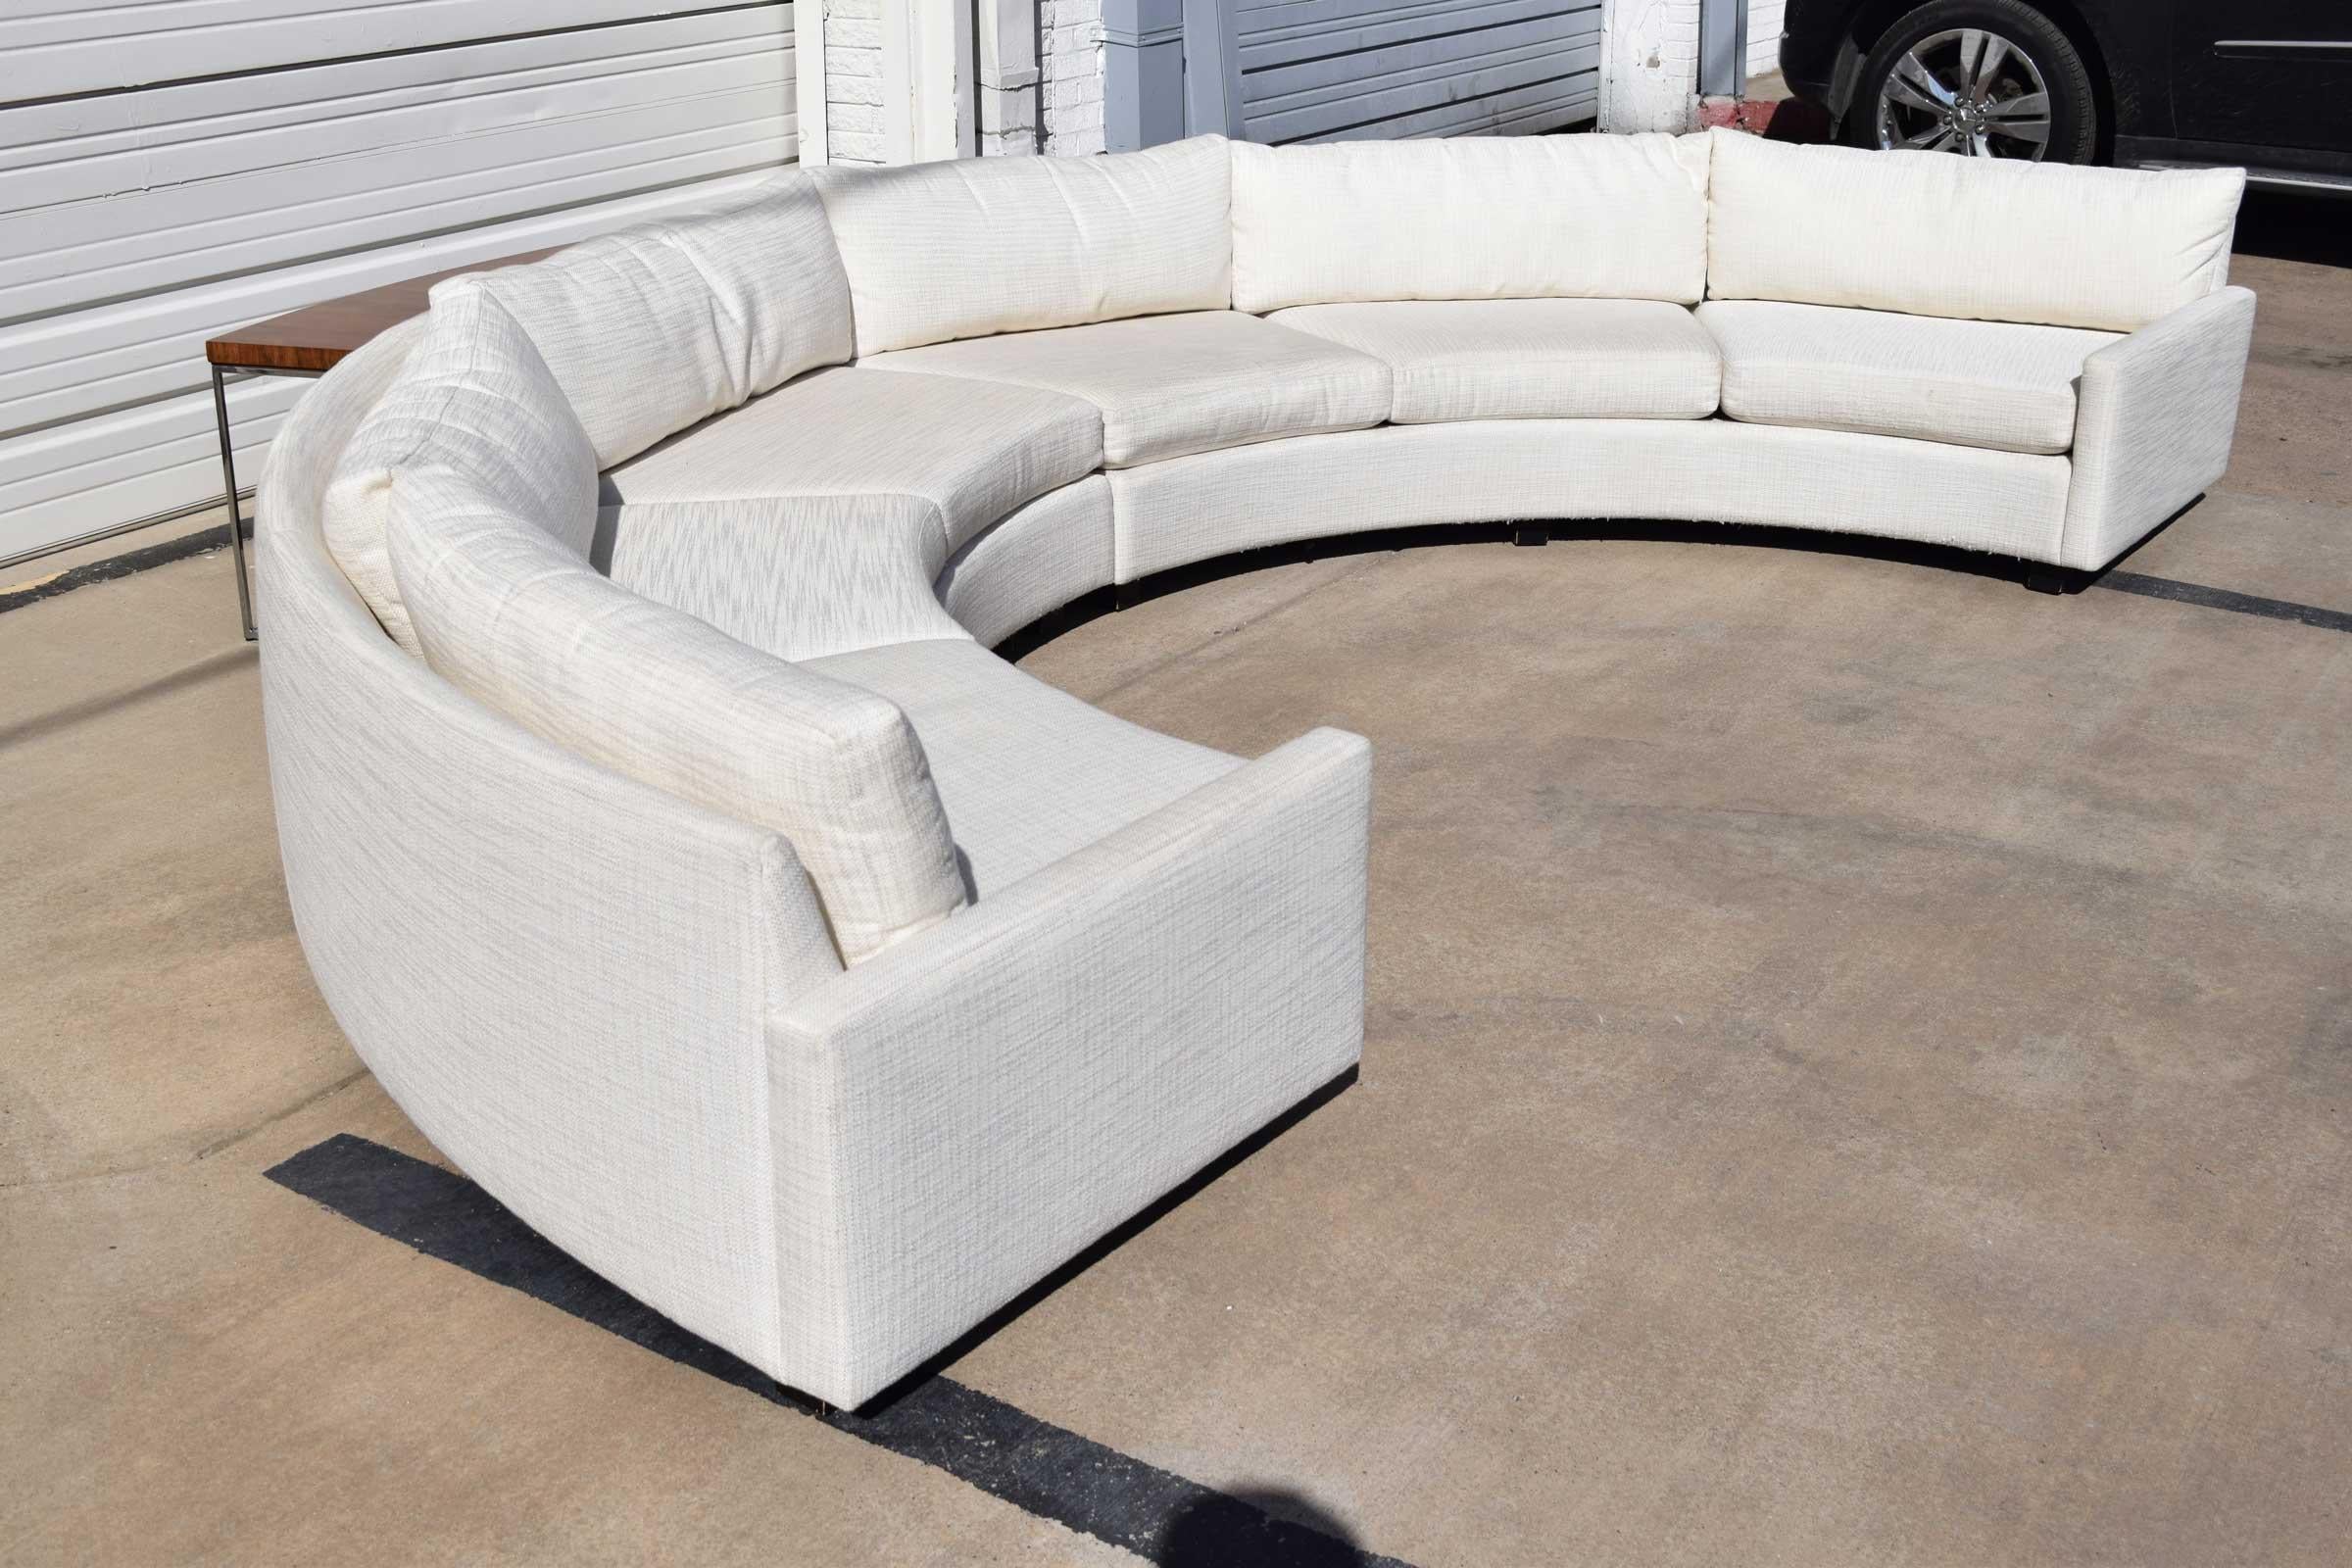 Metal Milo Baughman Curved Sectional in White Woven Fabric